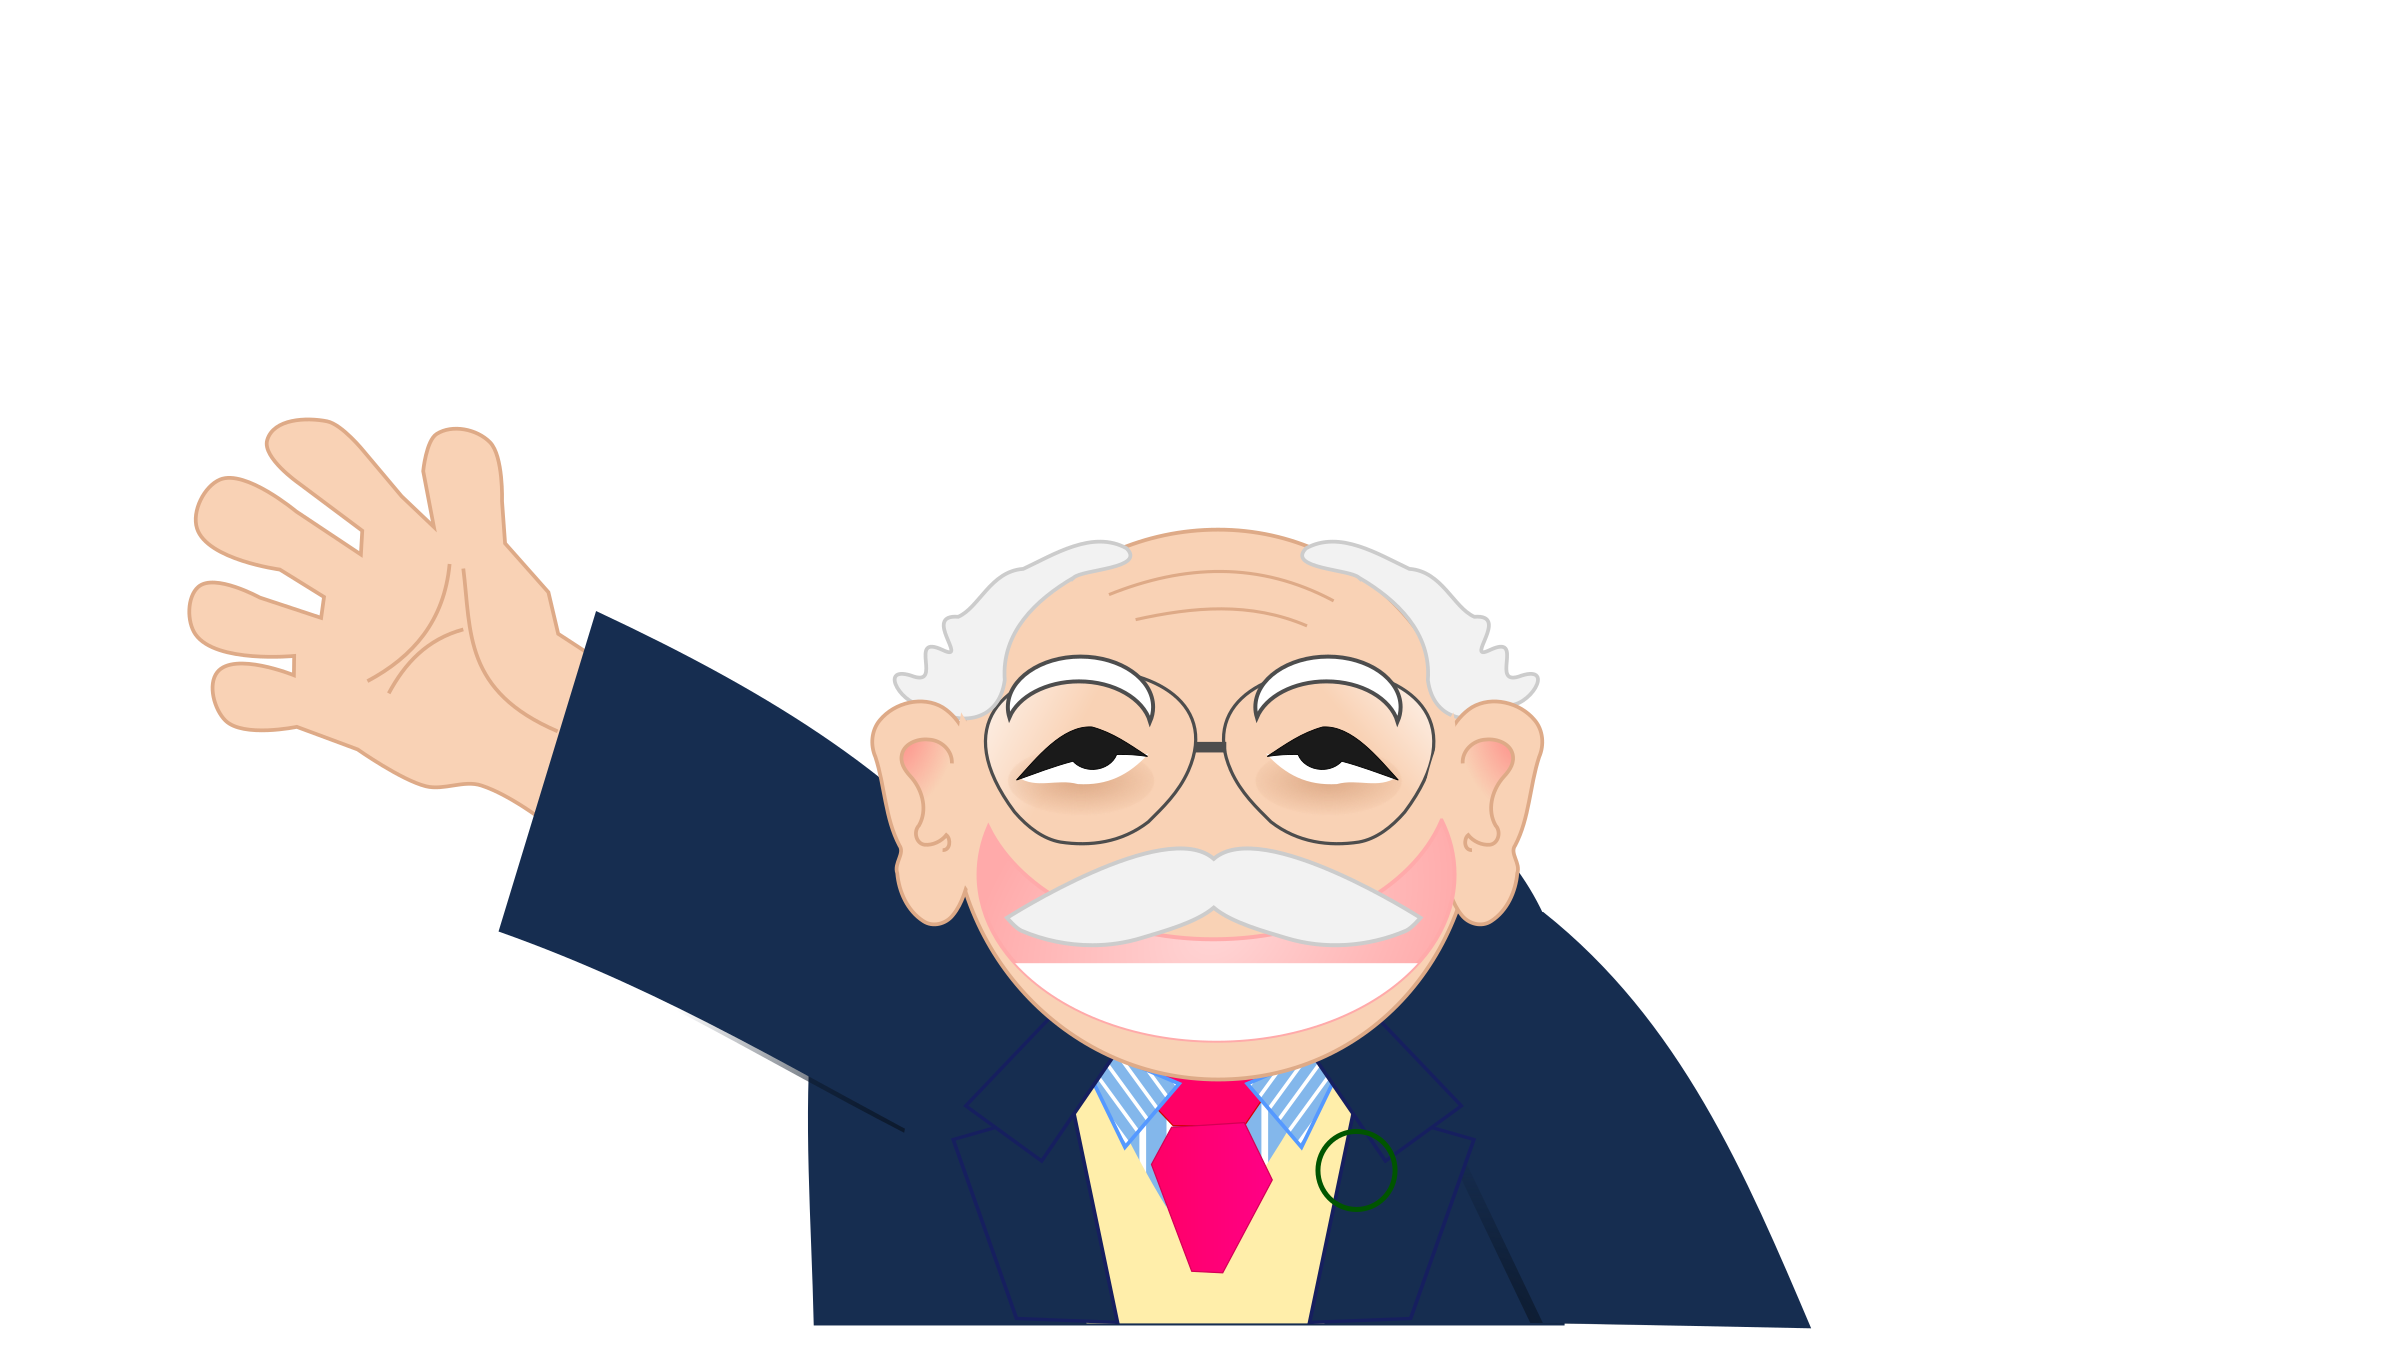 grandfather clipart old man